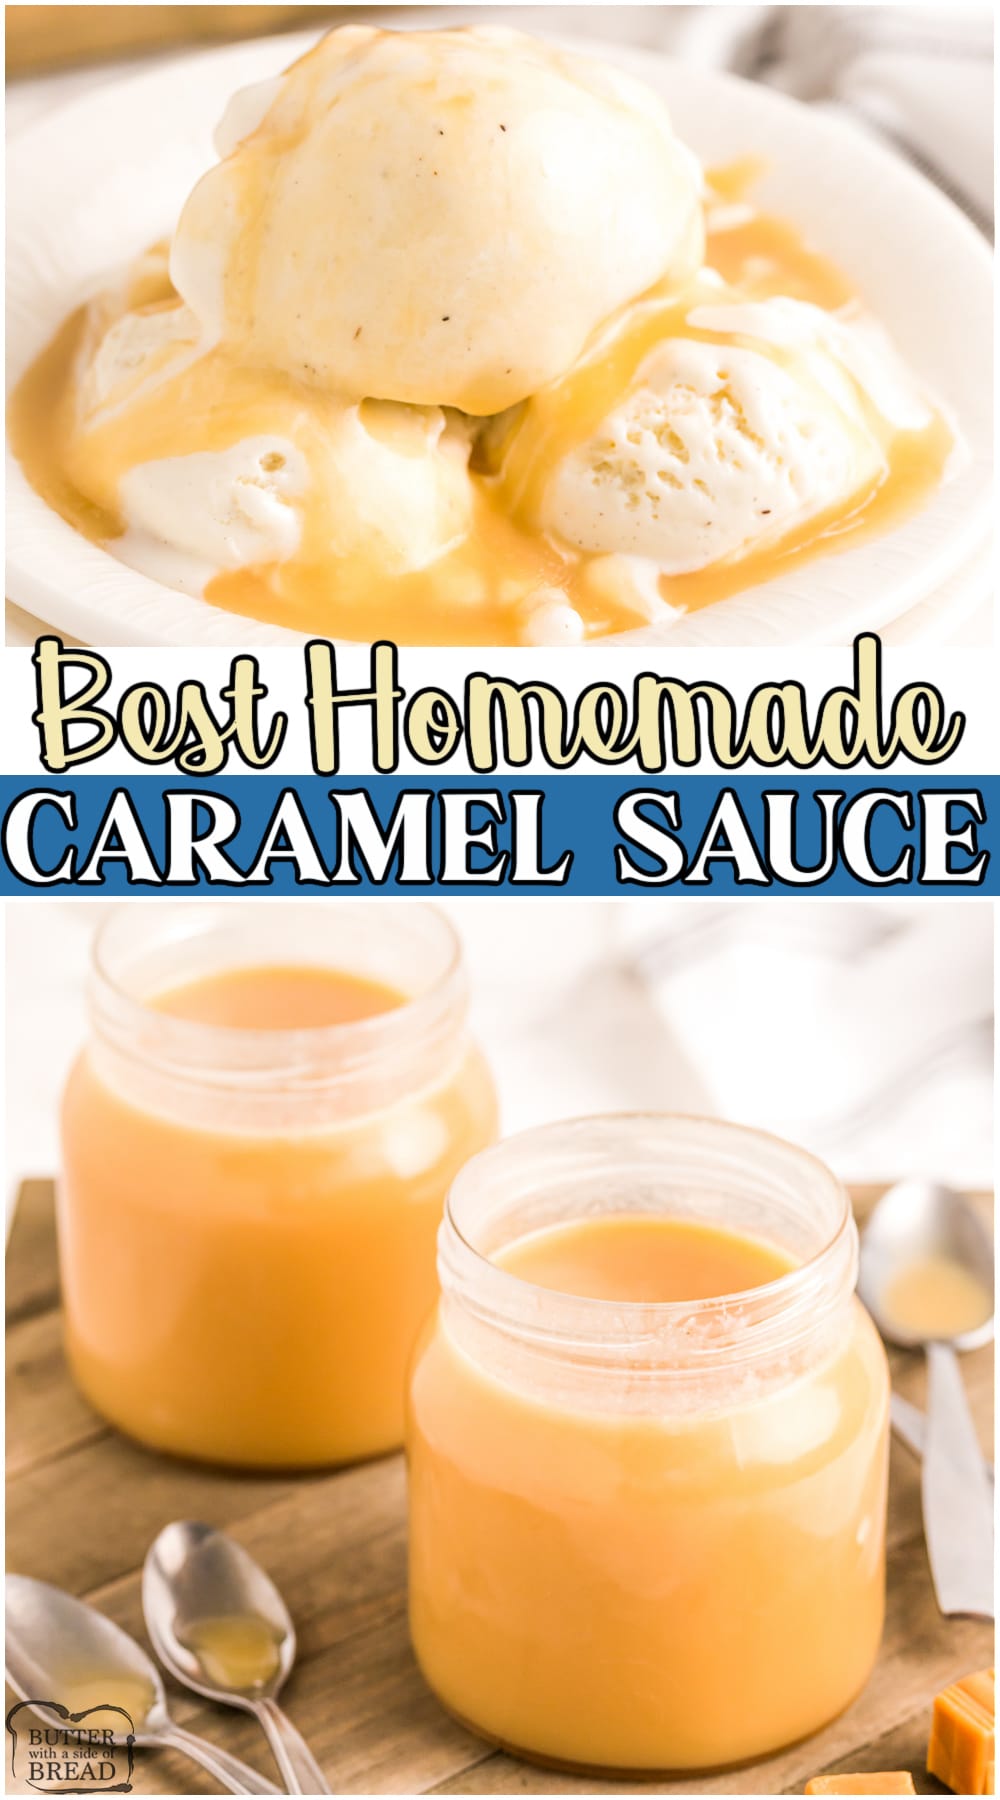 Grandma's BEST recipe for Homemade caramel sauce is made with heavy cream, brown sugar, and plenty of butter! Smooth, rich and utterly irresistible caramel perfect for topping ice cream, dipping apples, brownies, and more! #caramel #homemade #butter #easyrecipe from BUTTER WITH A SIDE OF BREAD